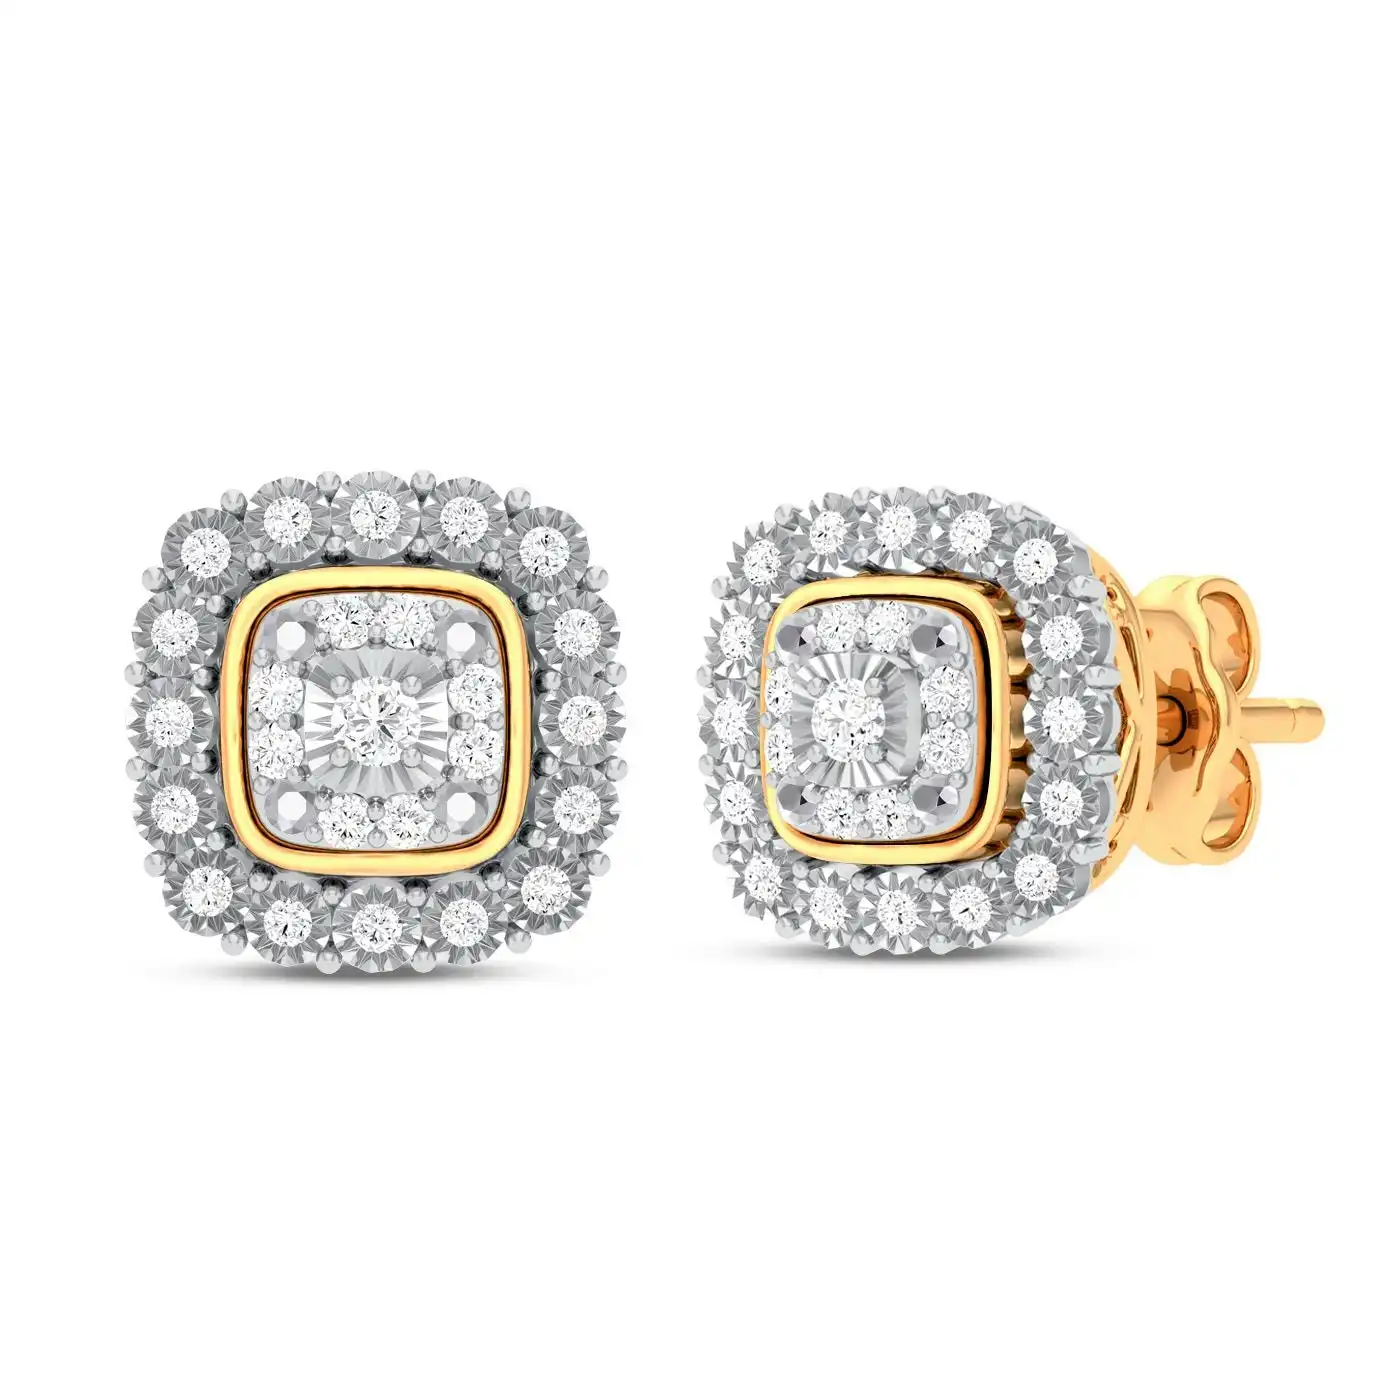 Square Halo Earrings with 0.15ct of Diamonds in 9ct Yellow Gold